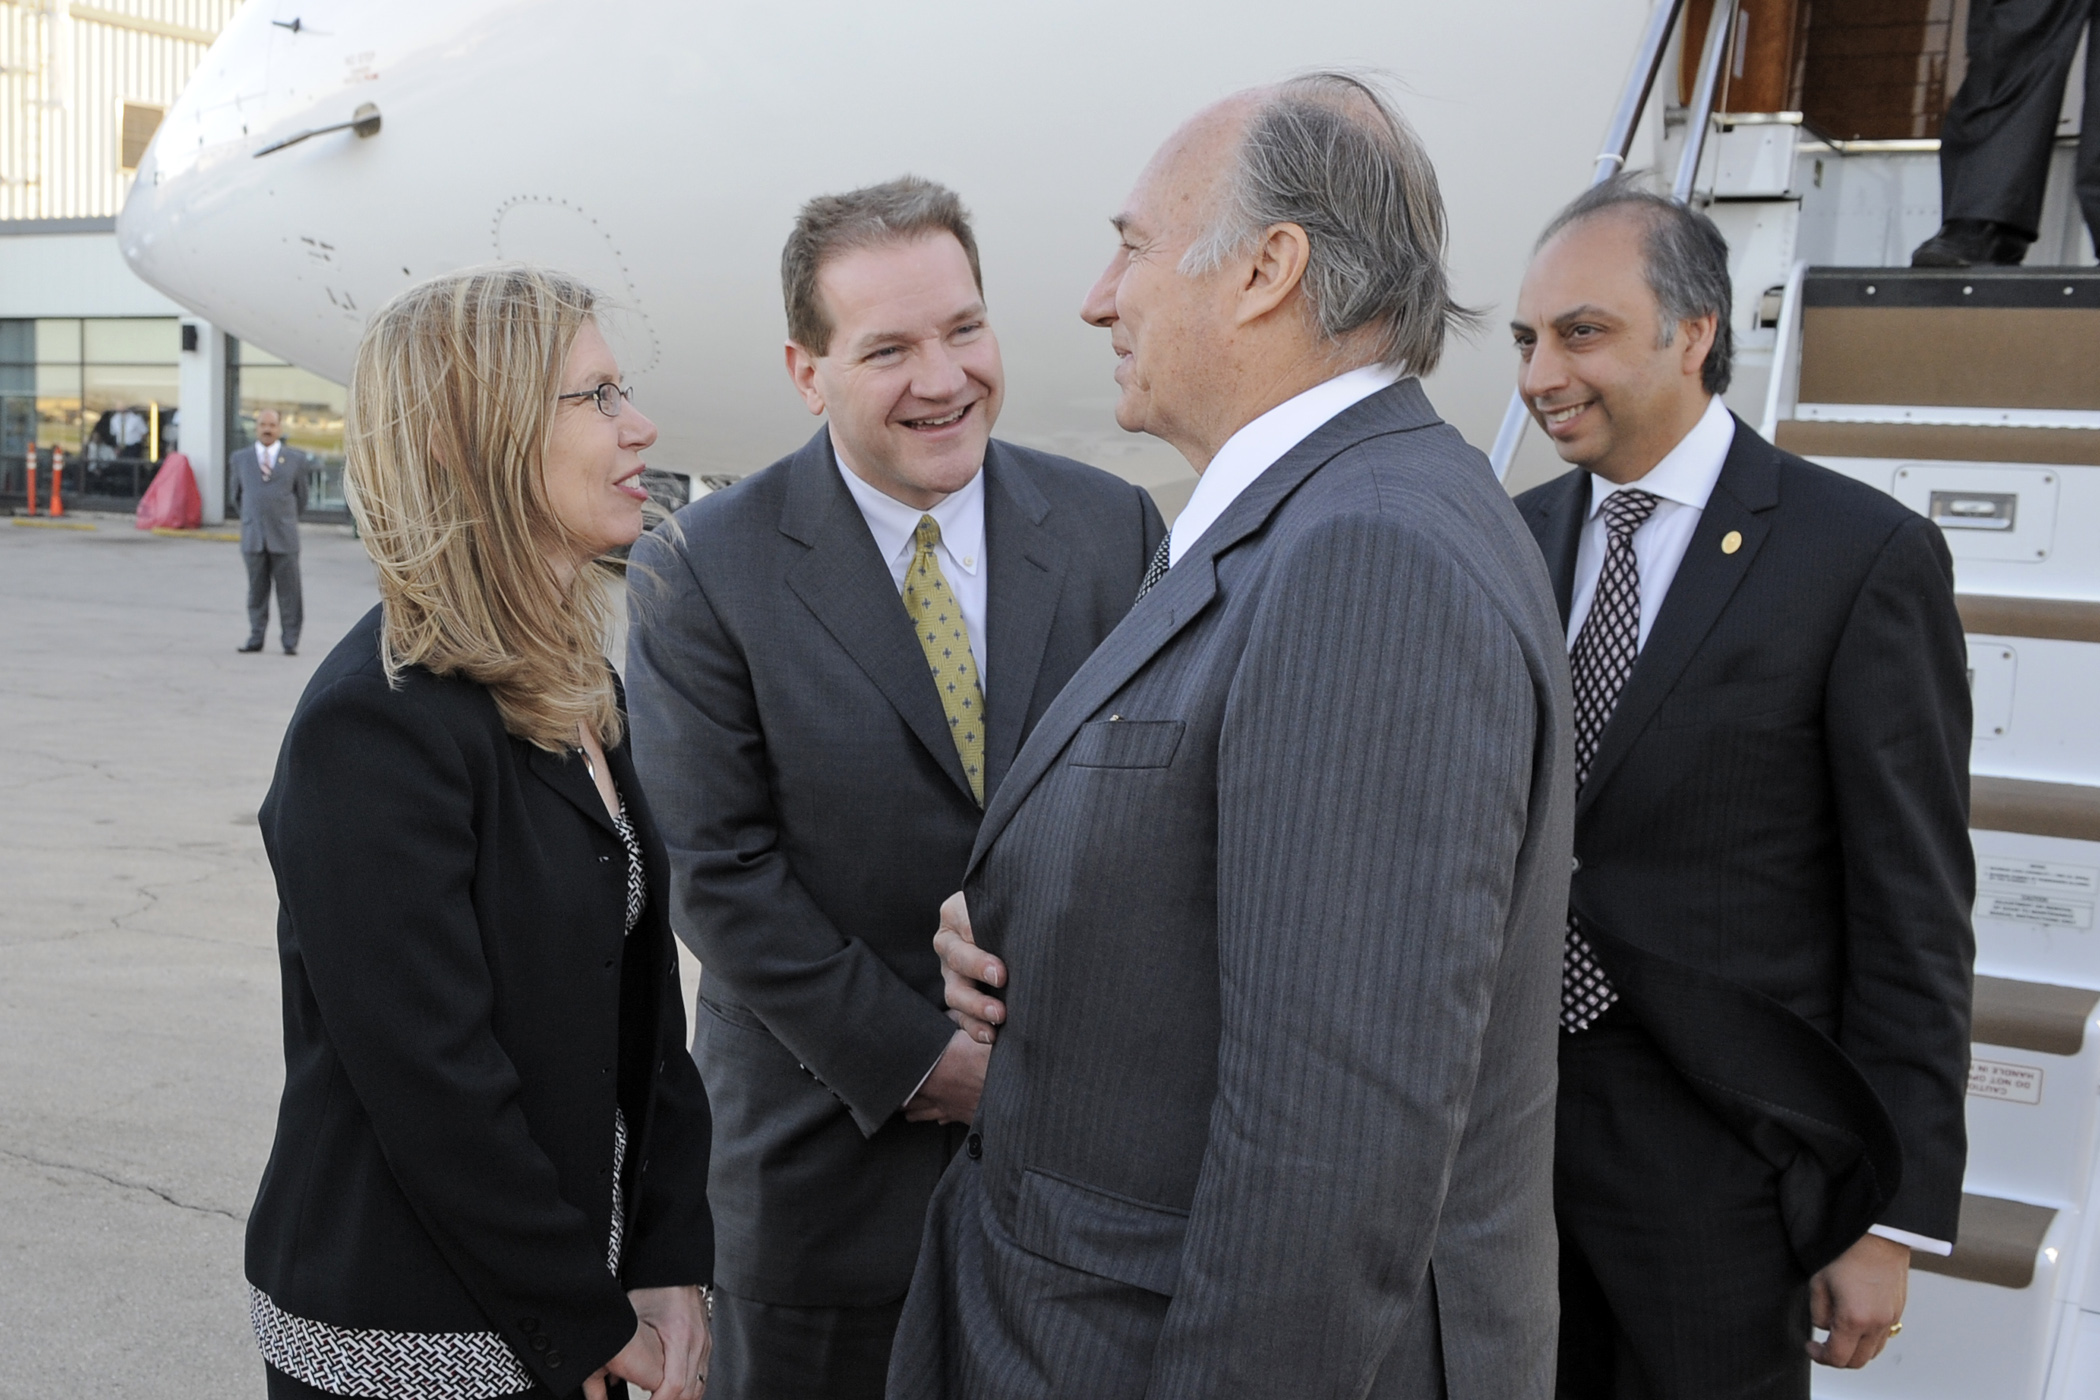 Upon arriving in Chicago, Mawlana Hazar Imam is met by Ms Sheila Nix, Deputy Governor of Illinois and Mr Jack Lavin, Director of Illinois Department of Commerce and Economic Opportunity. Photo: Gary Otte